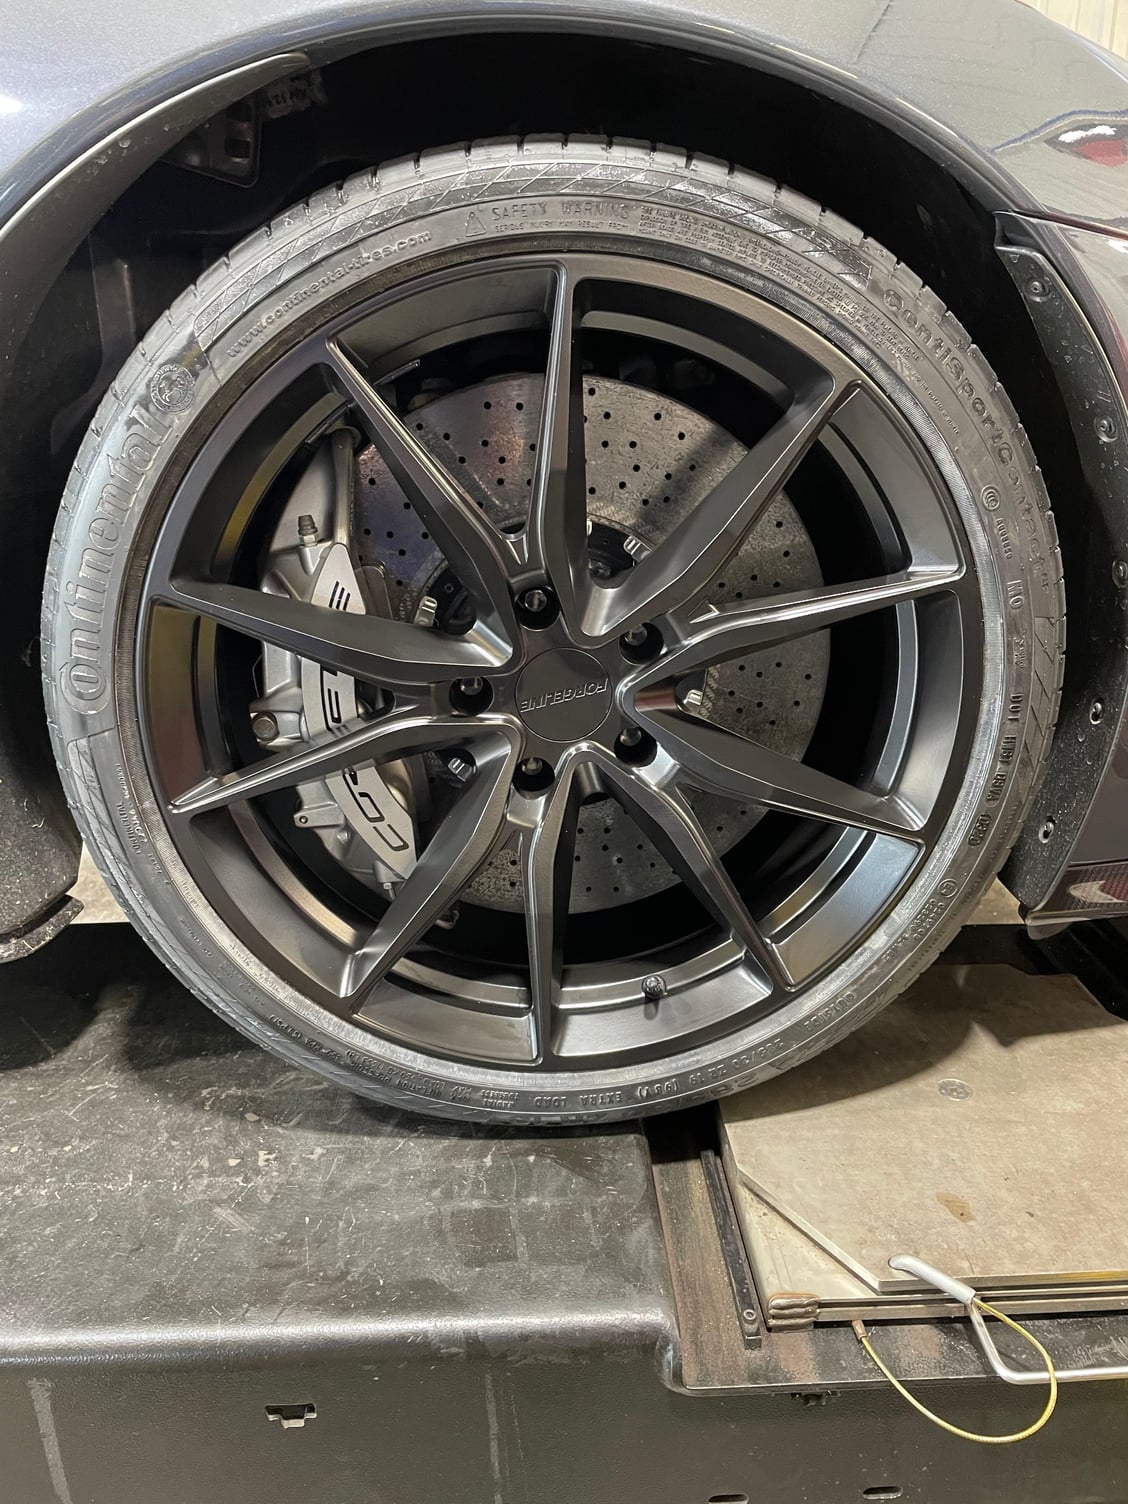 2020 Forgeline Wheels Official Sales Thread, Made in the USA 